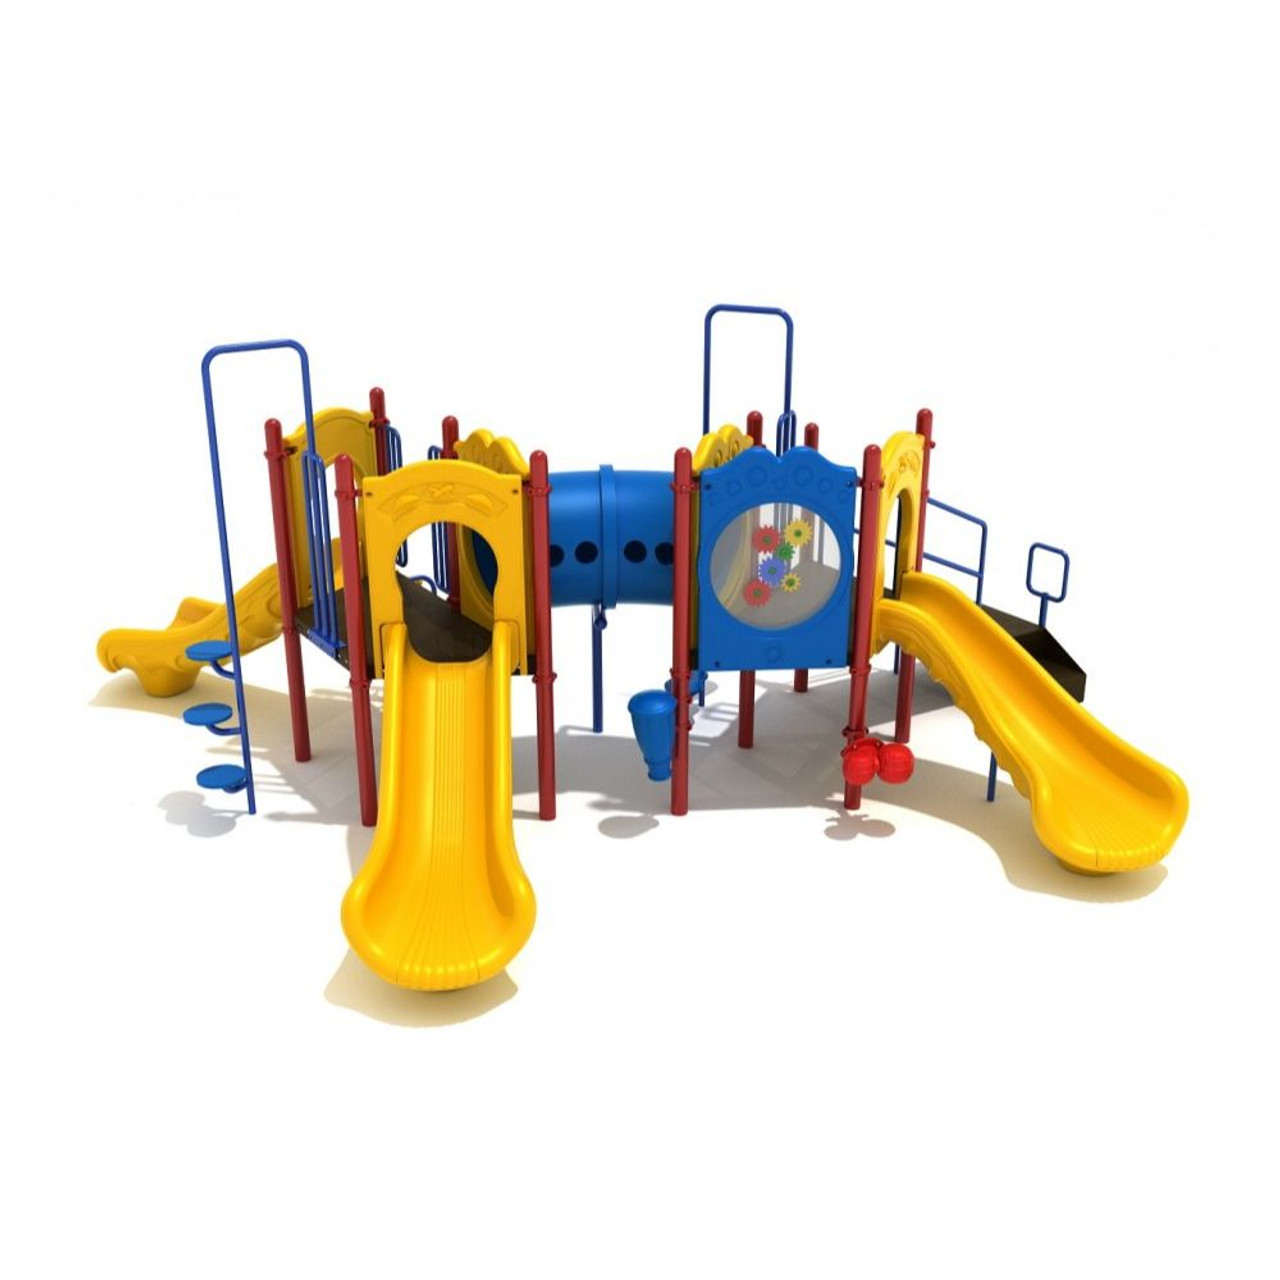 Ann Arbor Playset - primary color